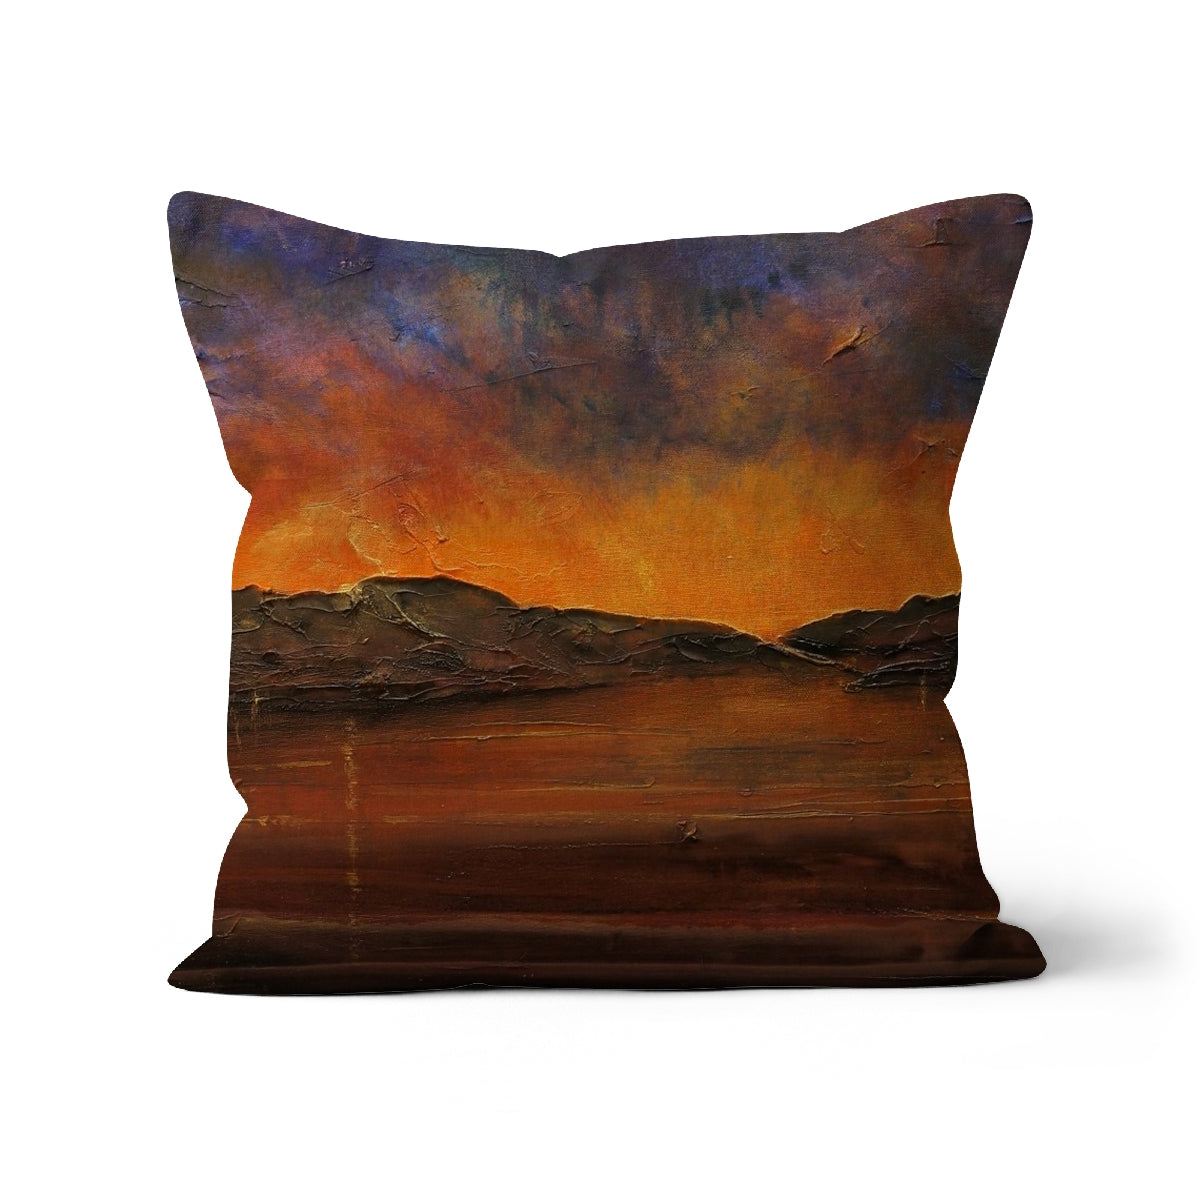 A Brooding Clyde Dusk Art Gifts Cushion-Cushions-River Clyde Art Gallery-Faux Suede-24"x24"-Paintings, Prints, Homeware, Art Gifts From Scotland By Scottish Artist Kevin Hunter